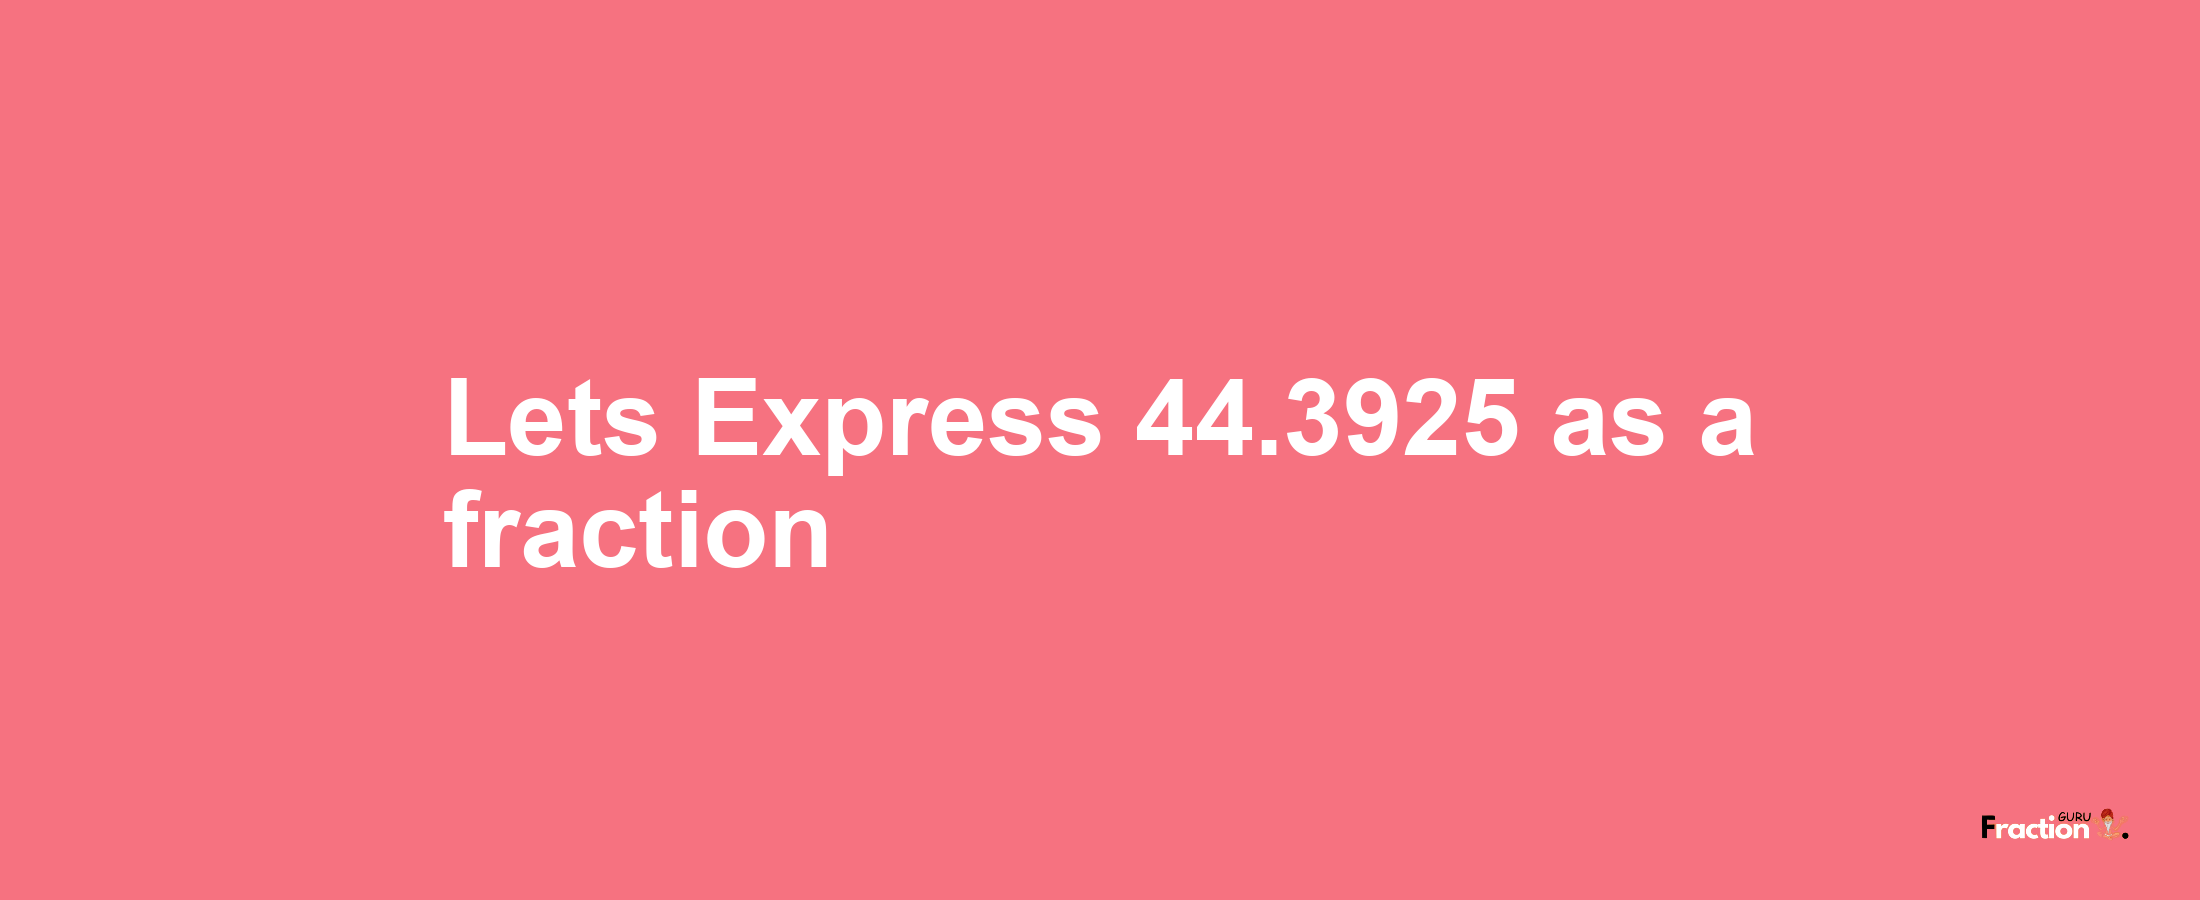 Lets Express 44.3925 as afraction